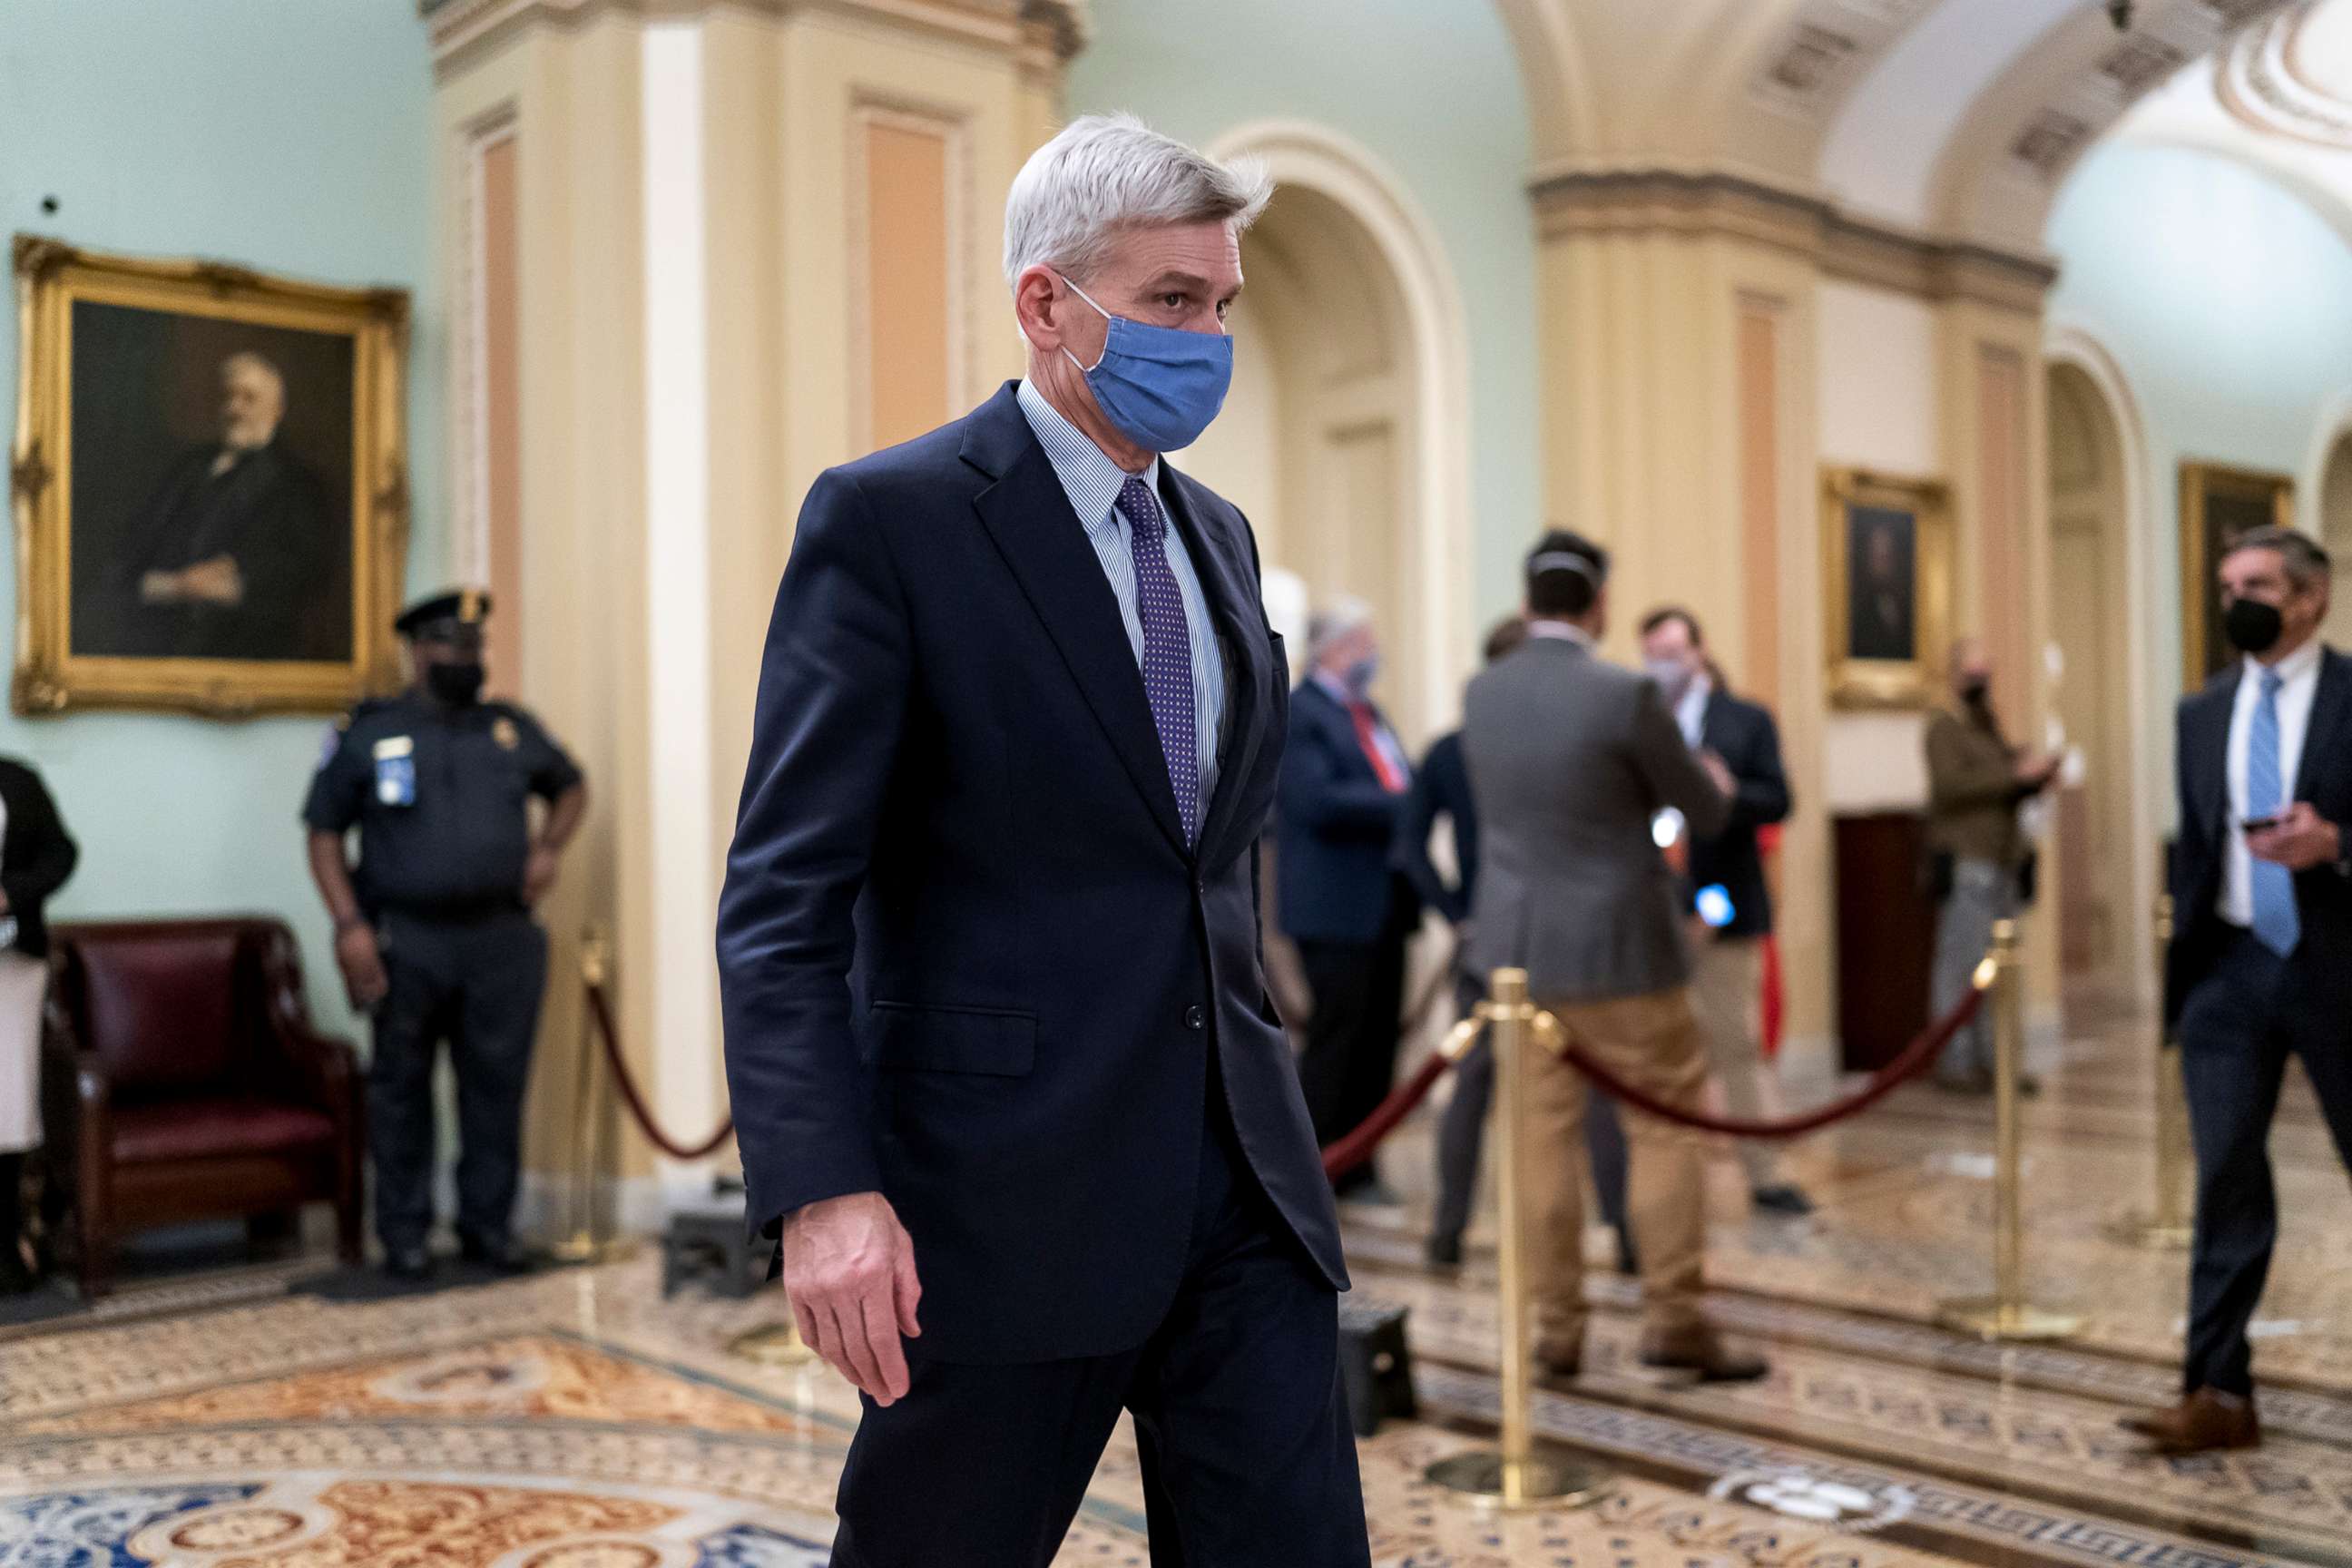 PHOTO: Sen. Bill Cassidy leaves the chamber as the Senate voted to consider hearing from witnesses in the impeachment trial of former President Donald Trump, at the Capitol in Washington, D.C., Feb. 13, 2021.